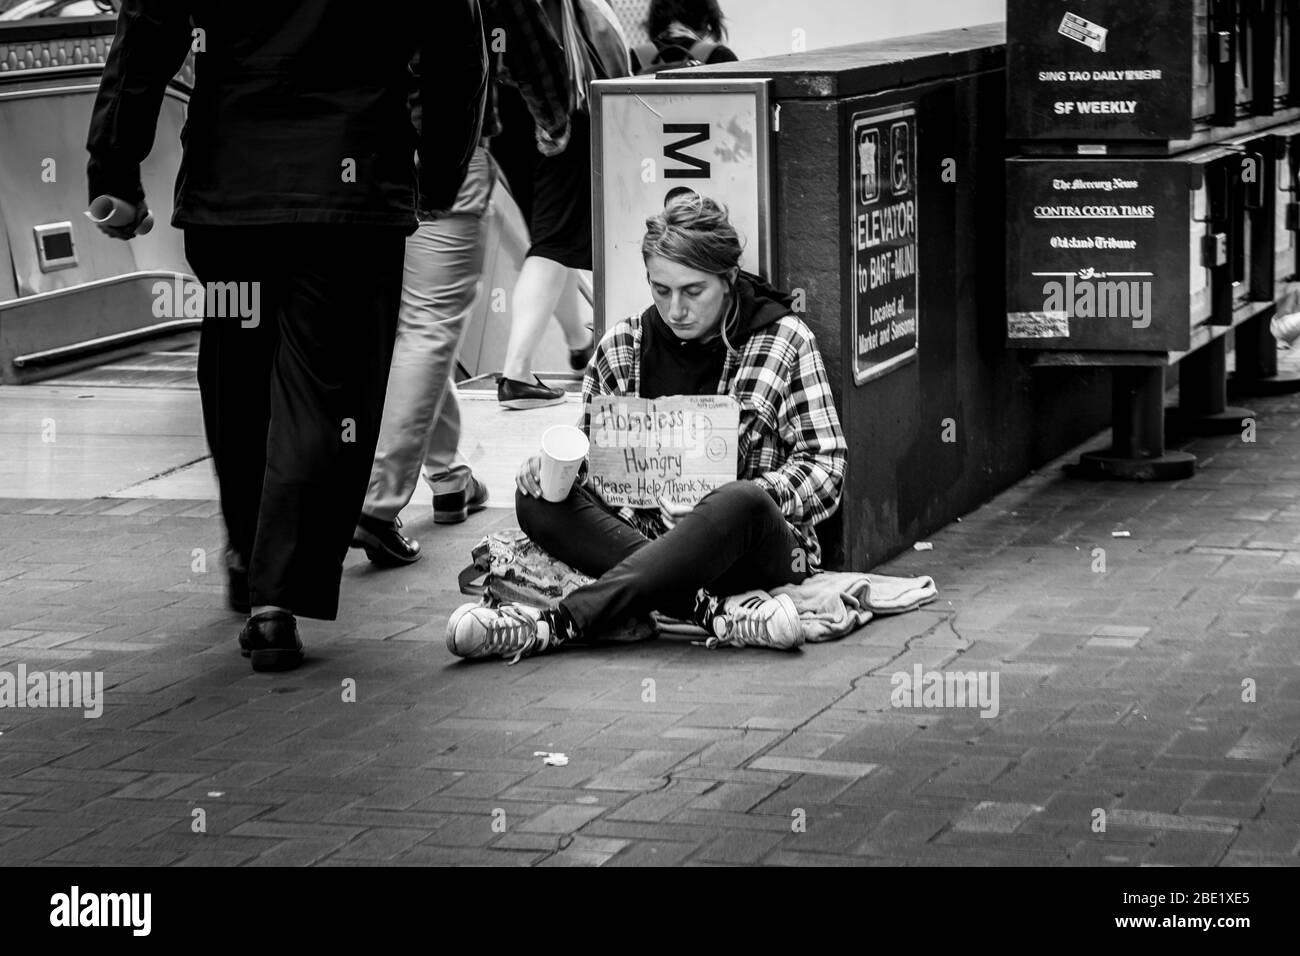 Homeless on the street in San Francisco, USA - August 21, 2019. Stock Photo